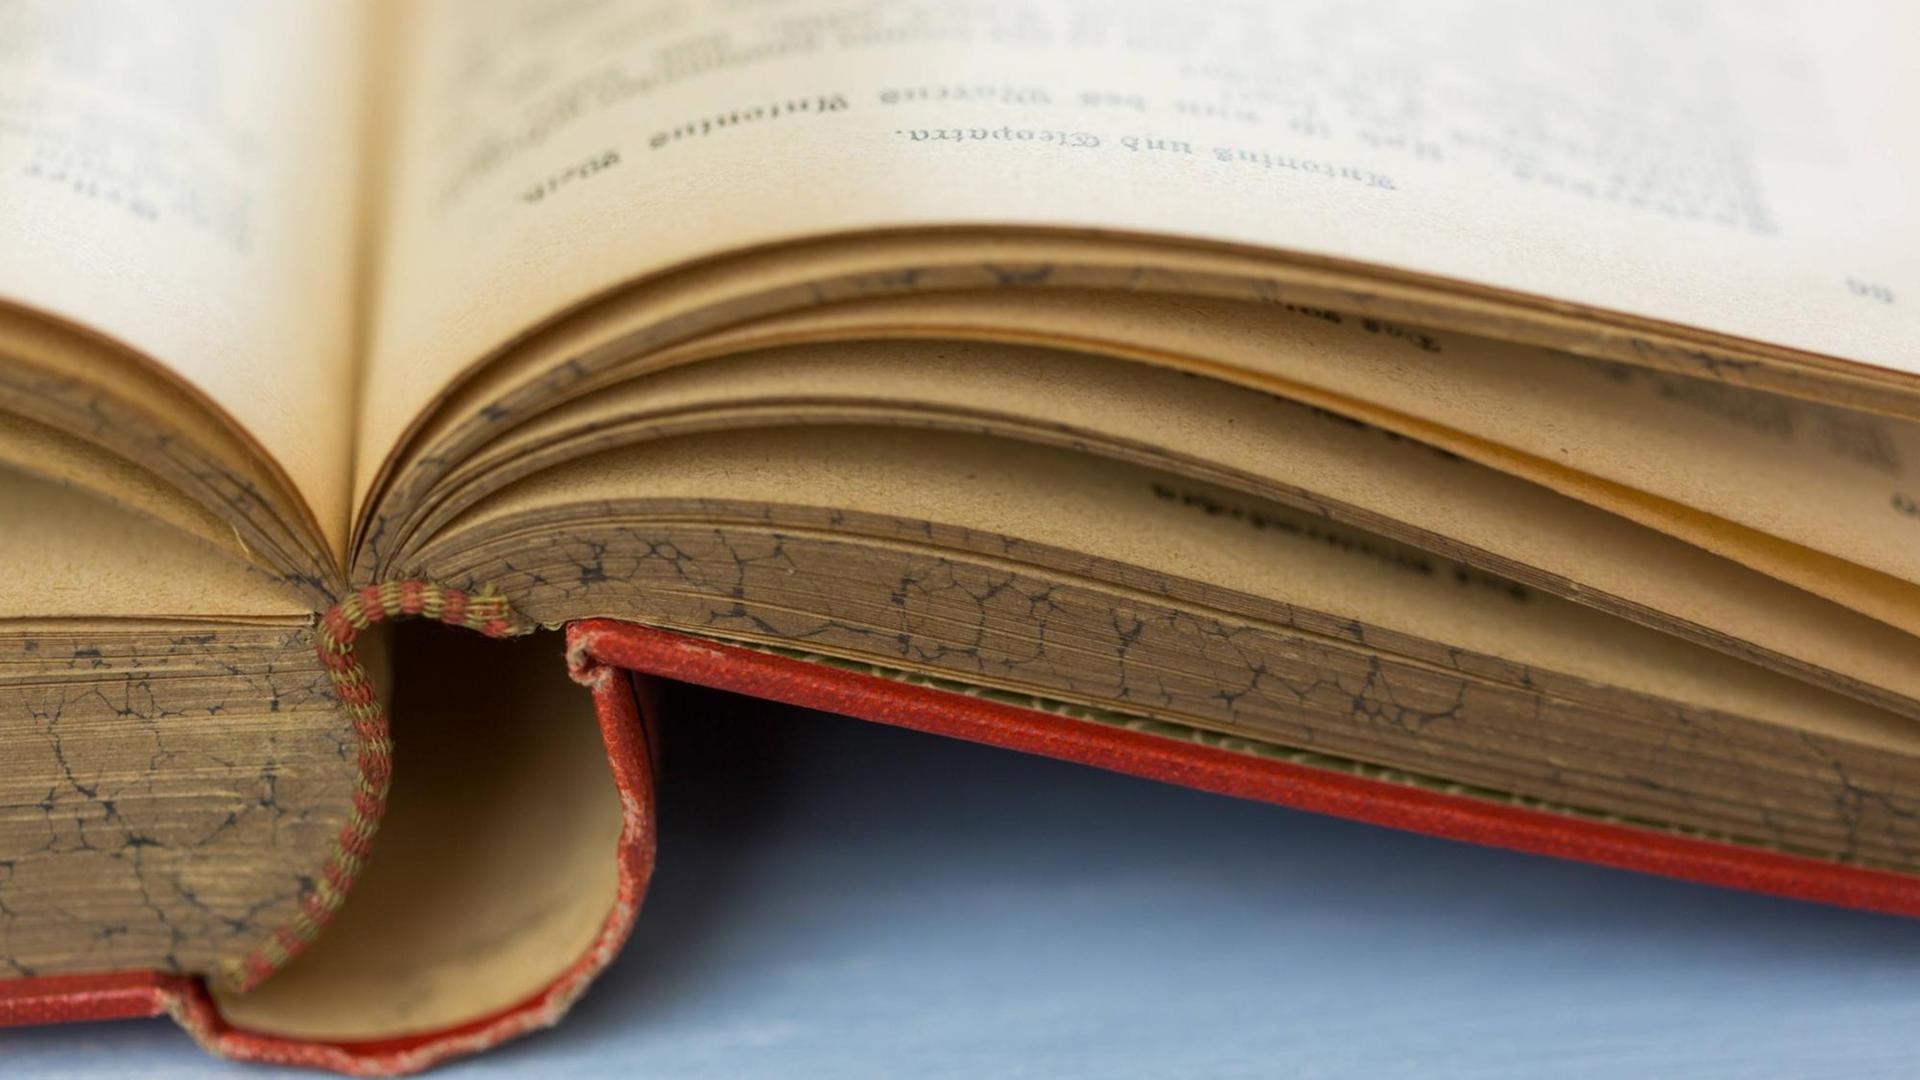 Corner of the page of an aged open vintage hardcover book with yellowed pages in a close up selective focus view Corner of the page of an aged open book Copyright: xJuliaxPfeiferx